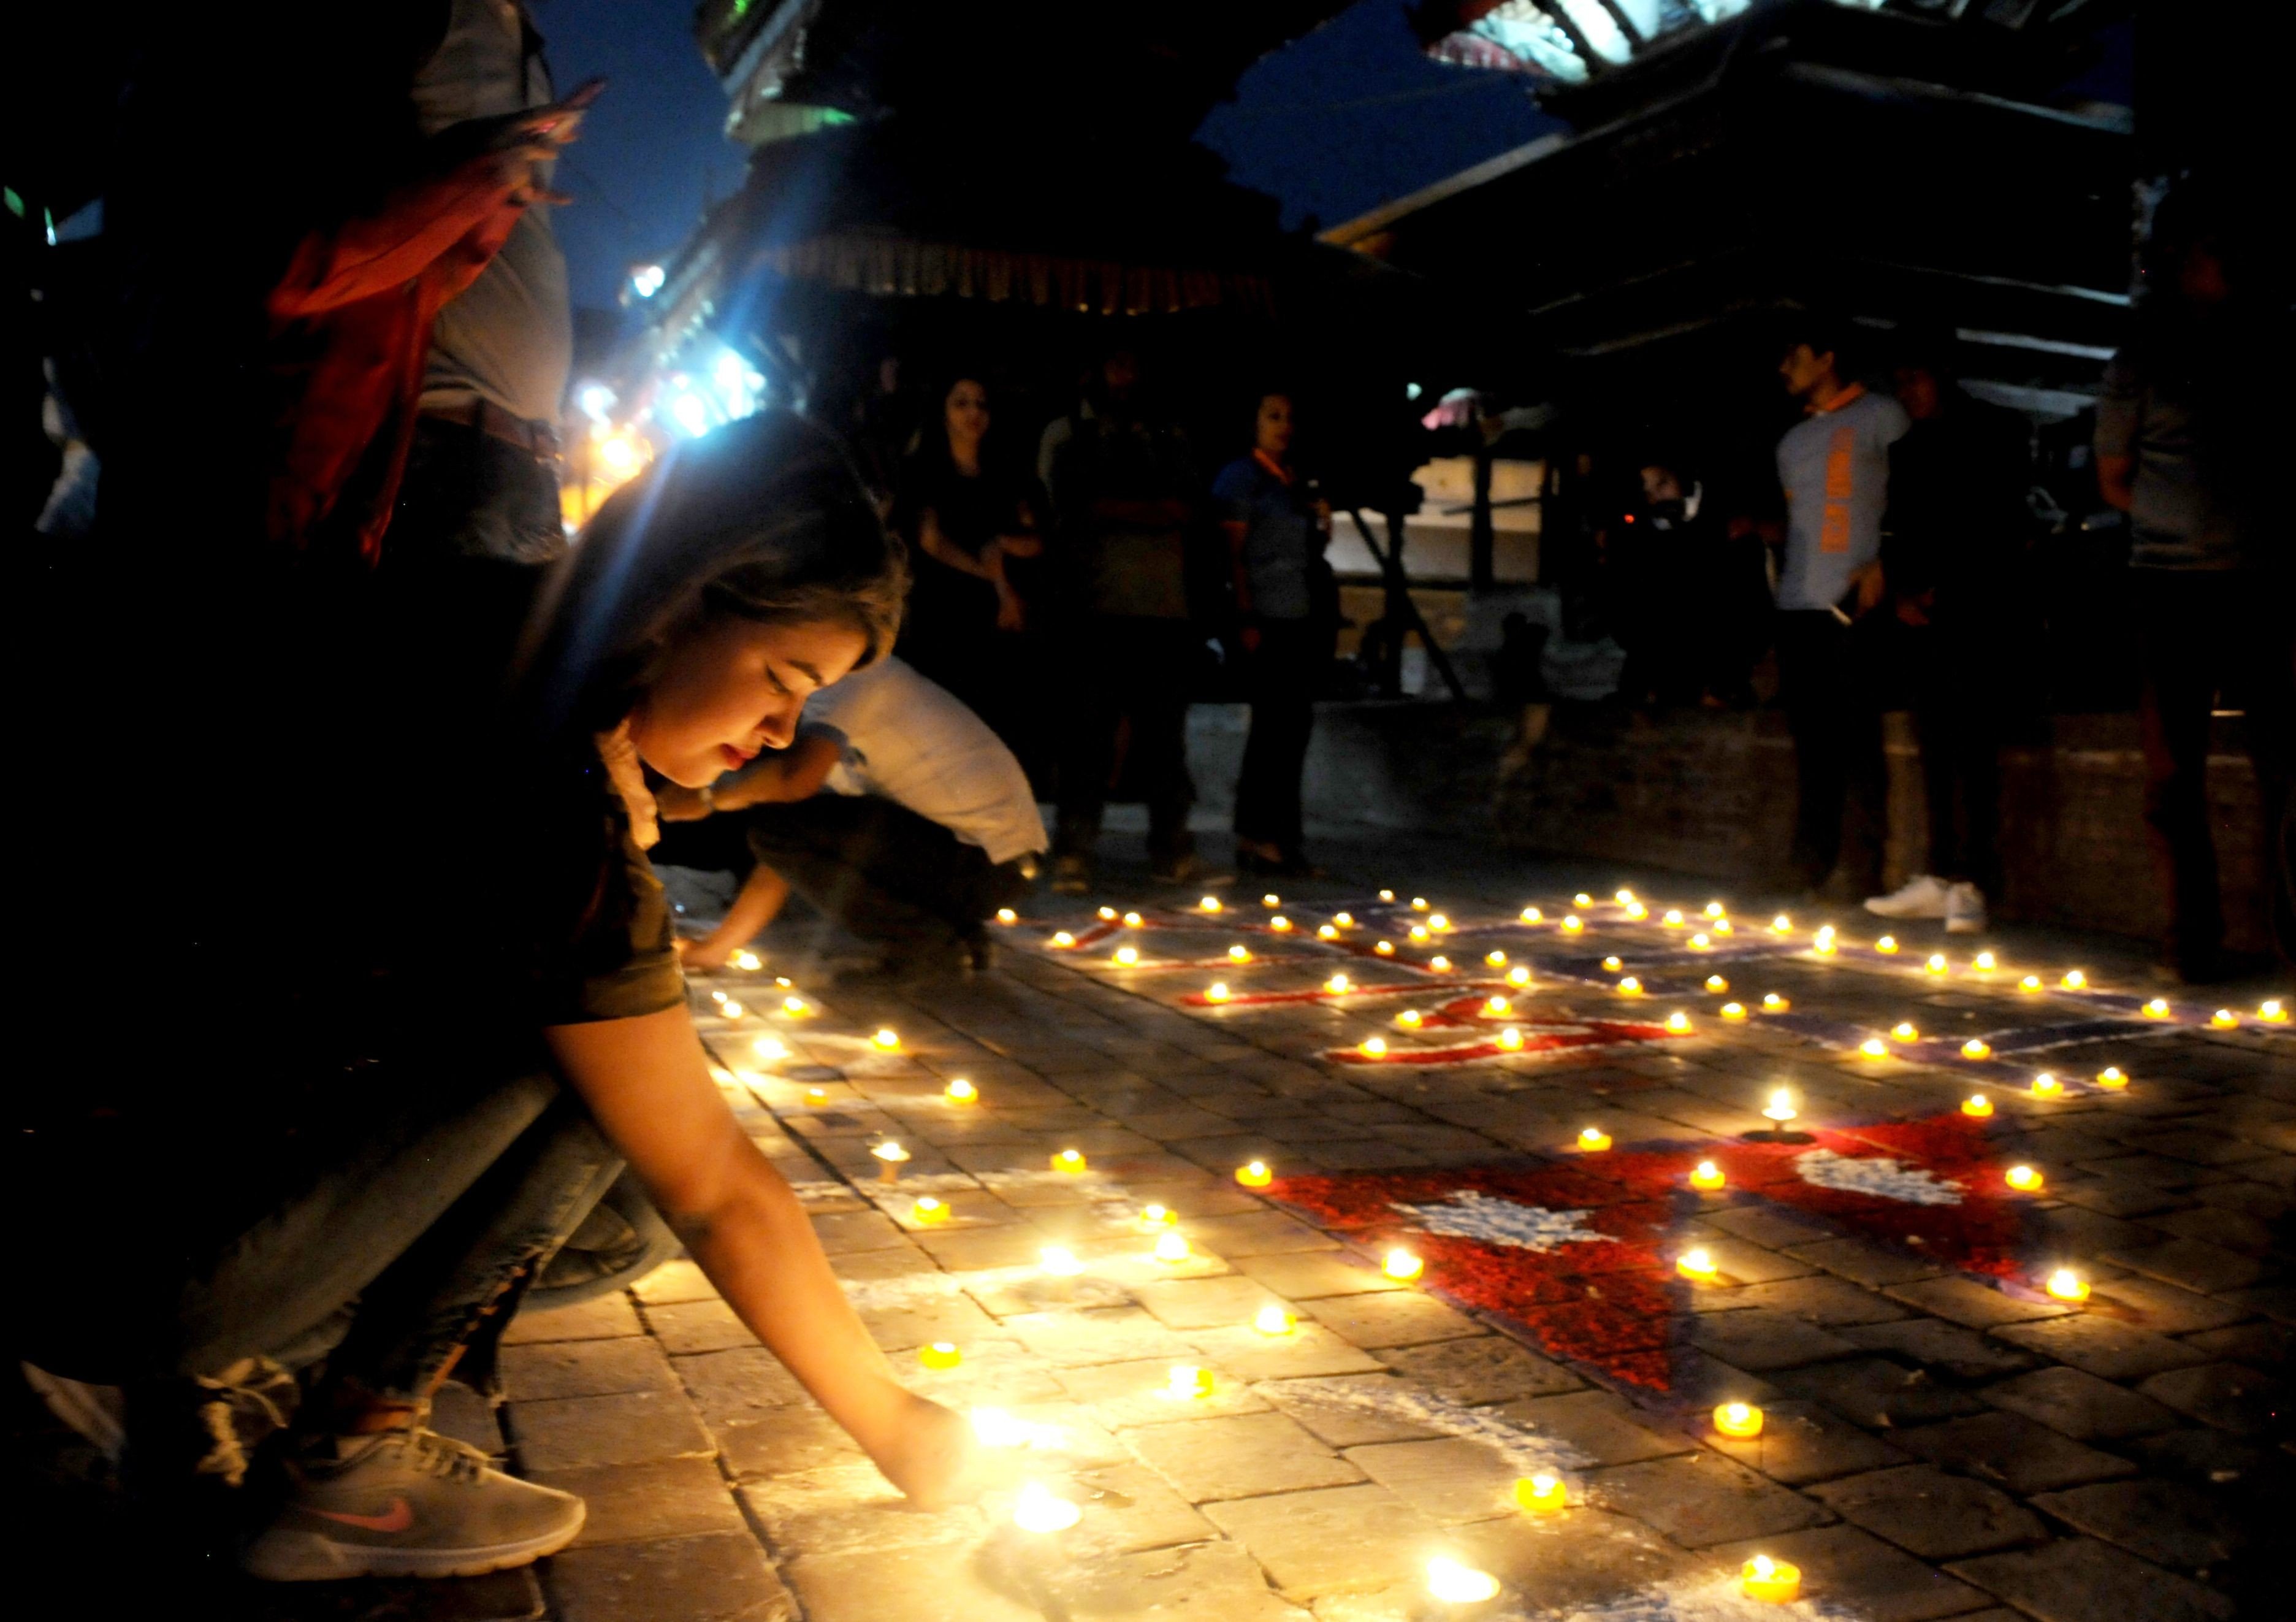 Kathmandu residents take part in a vigil on Wednesday marking the third anniversary of the earthquake that struck Nepal on April 25, 2015, killing almost 9,000 people. Photo: Agence France-Presse